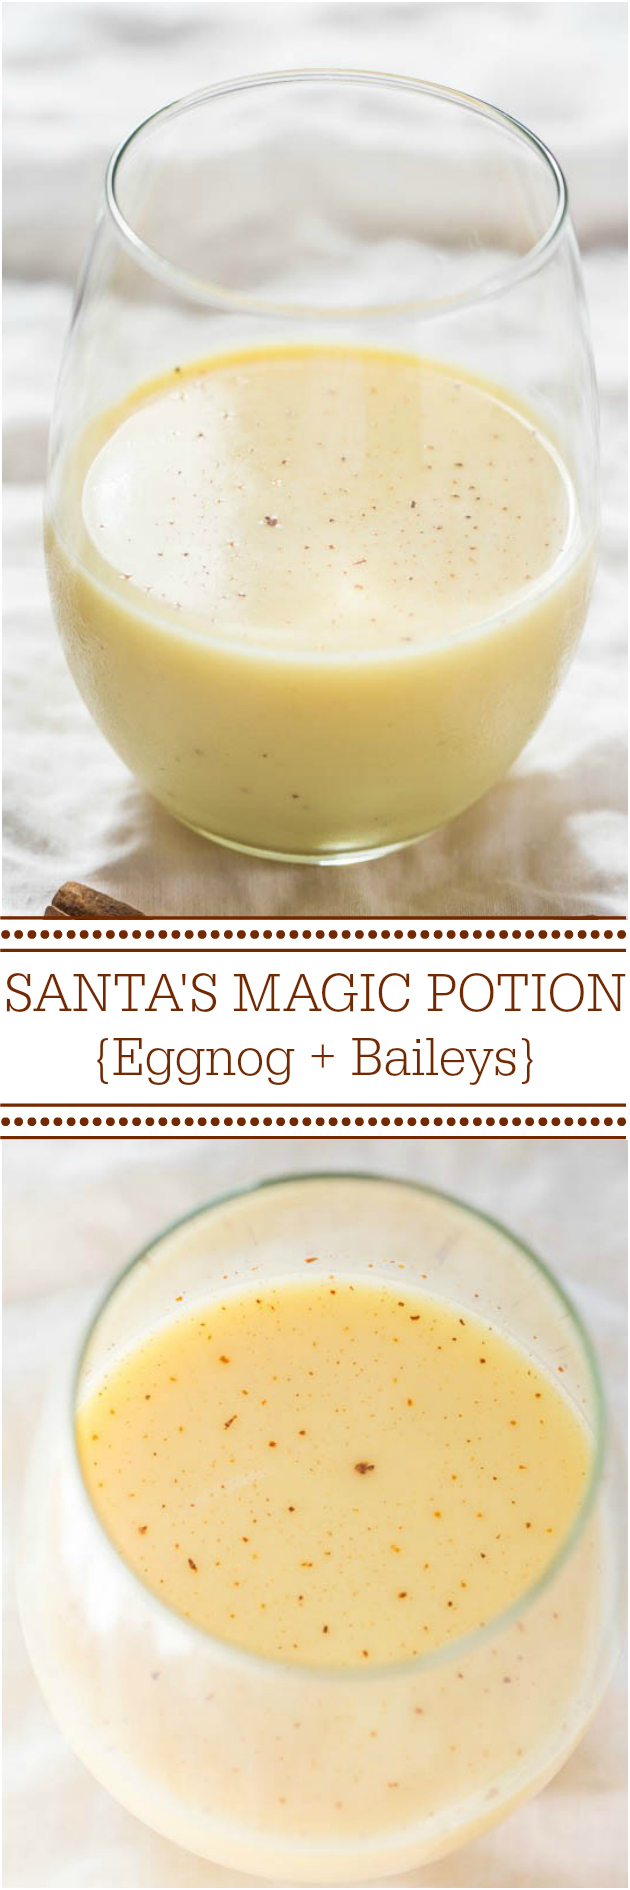 Santa's Magic Potion {Eggnog and Baileys} - Have eggnog to use? This drink is smooth, creamy, and puts your 'nog to great use! Mmm!